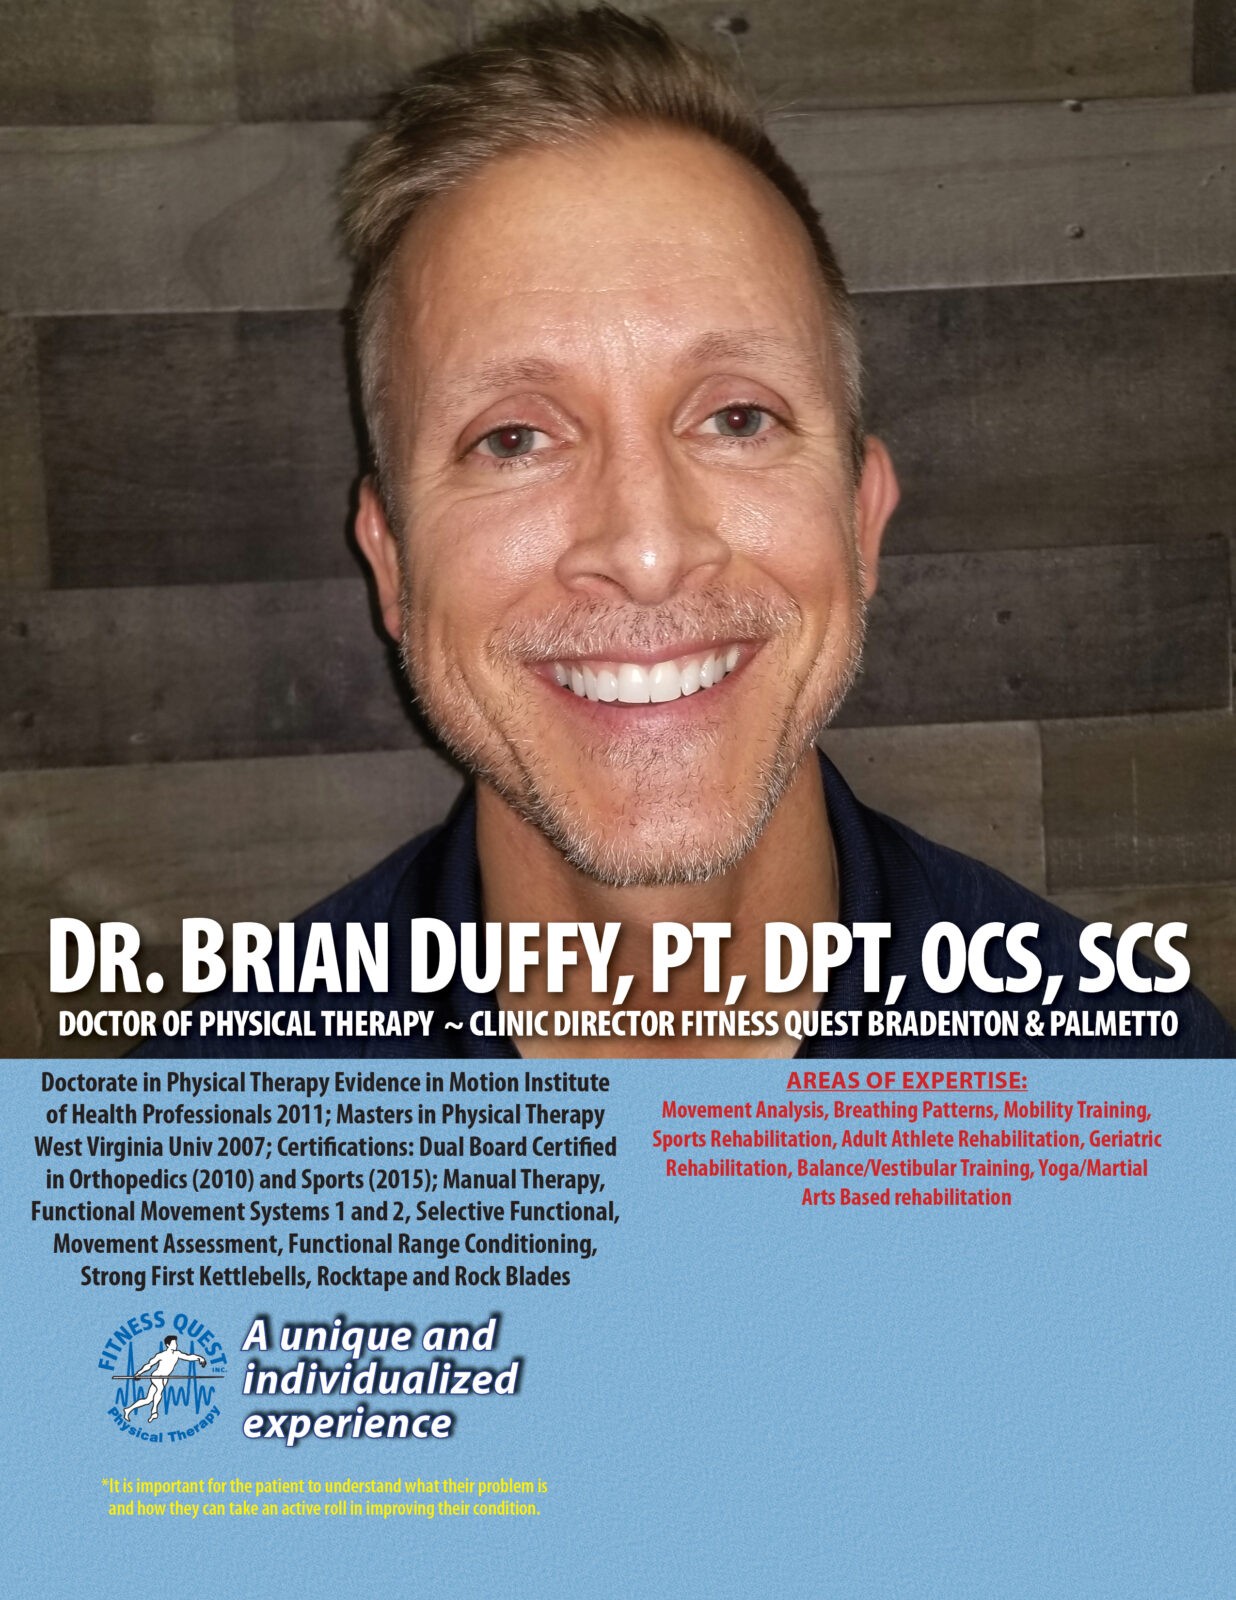 Doctor of Physical Therapy, Clinic Director Fitness Quest Bradenton & Palmetto